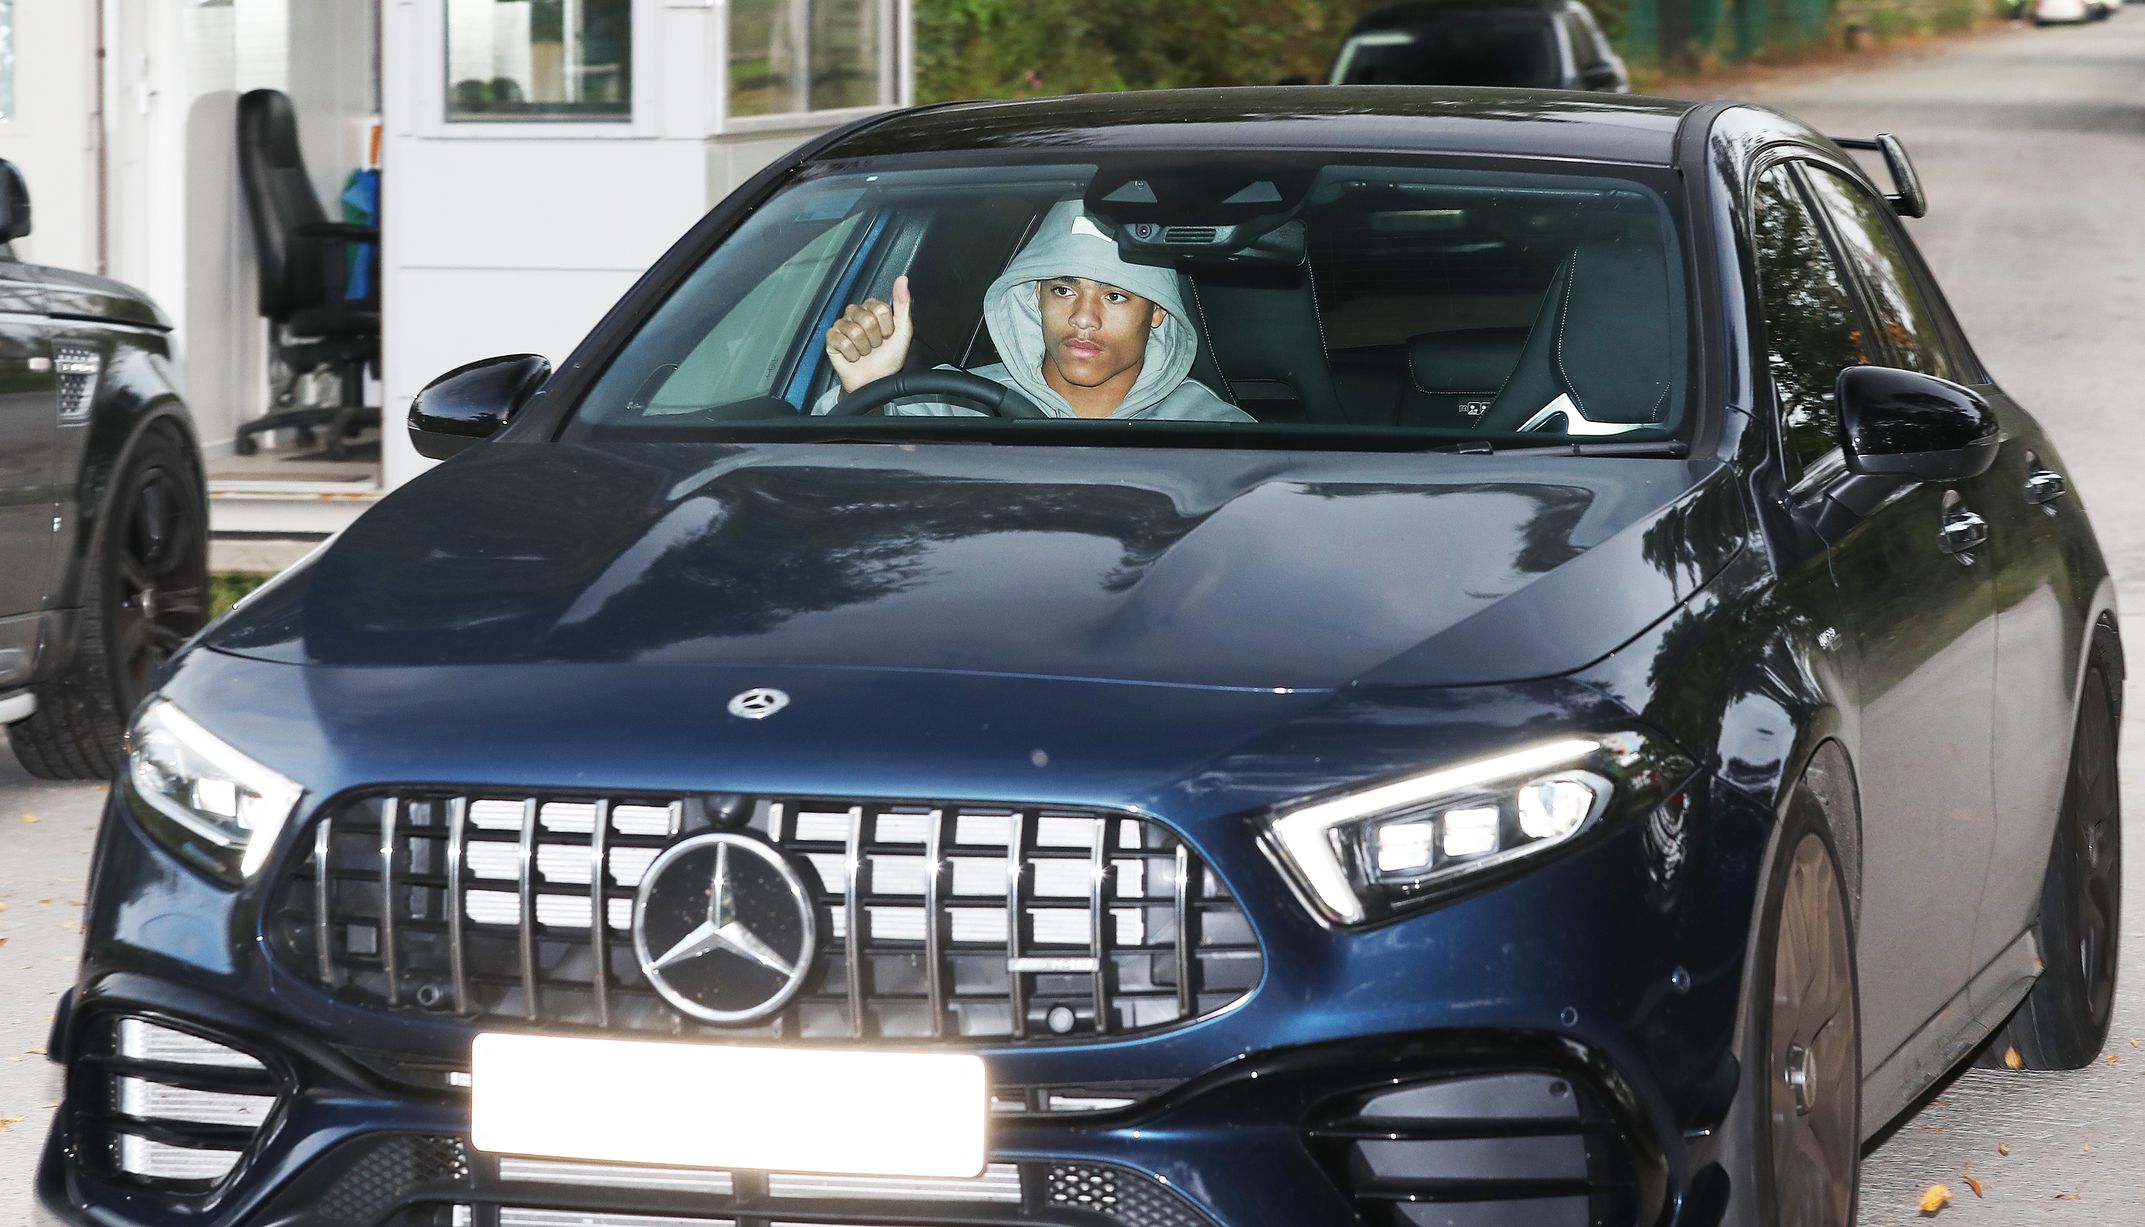 Pictures: Manchester United players arrive for training before Crystal Palace fixture - Bóng Đá